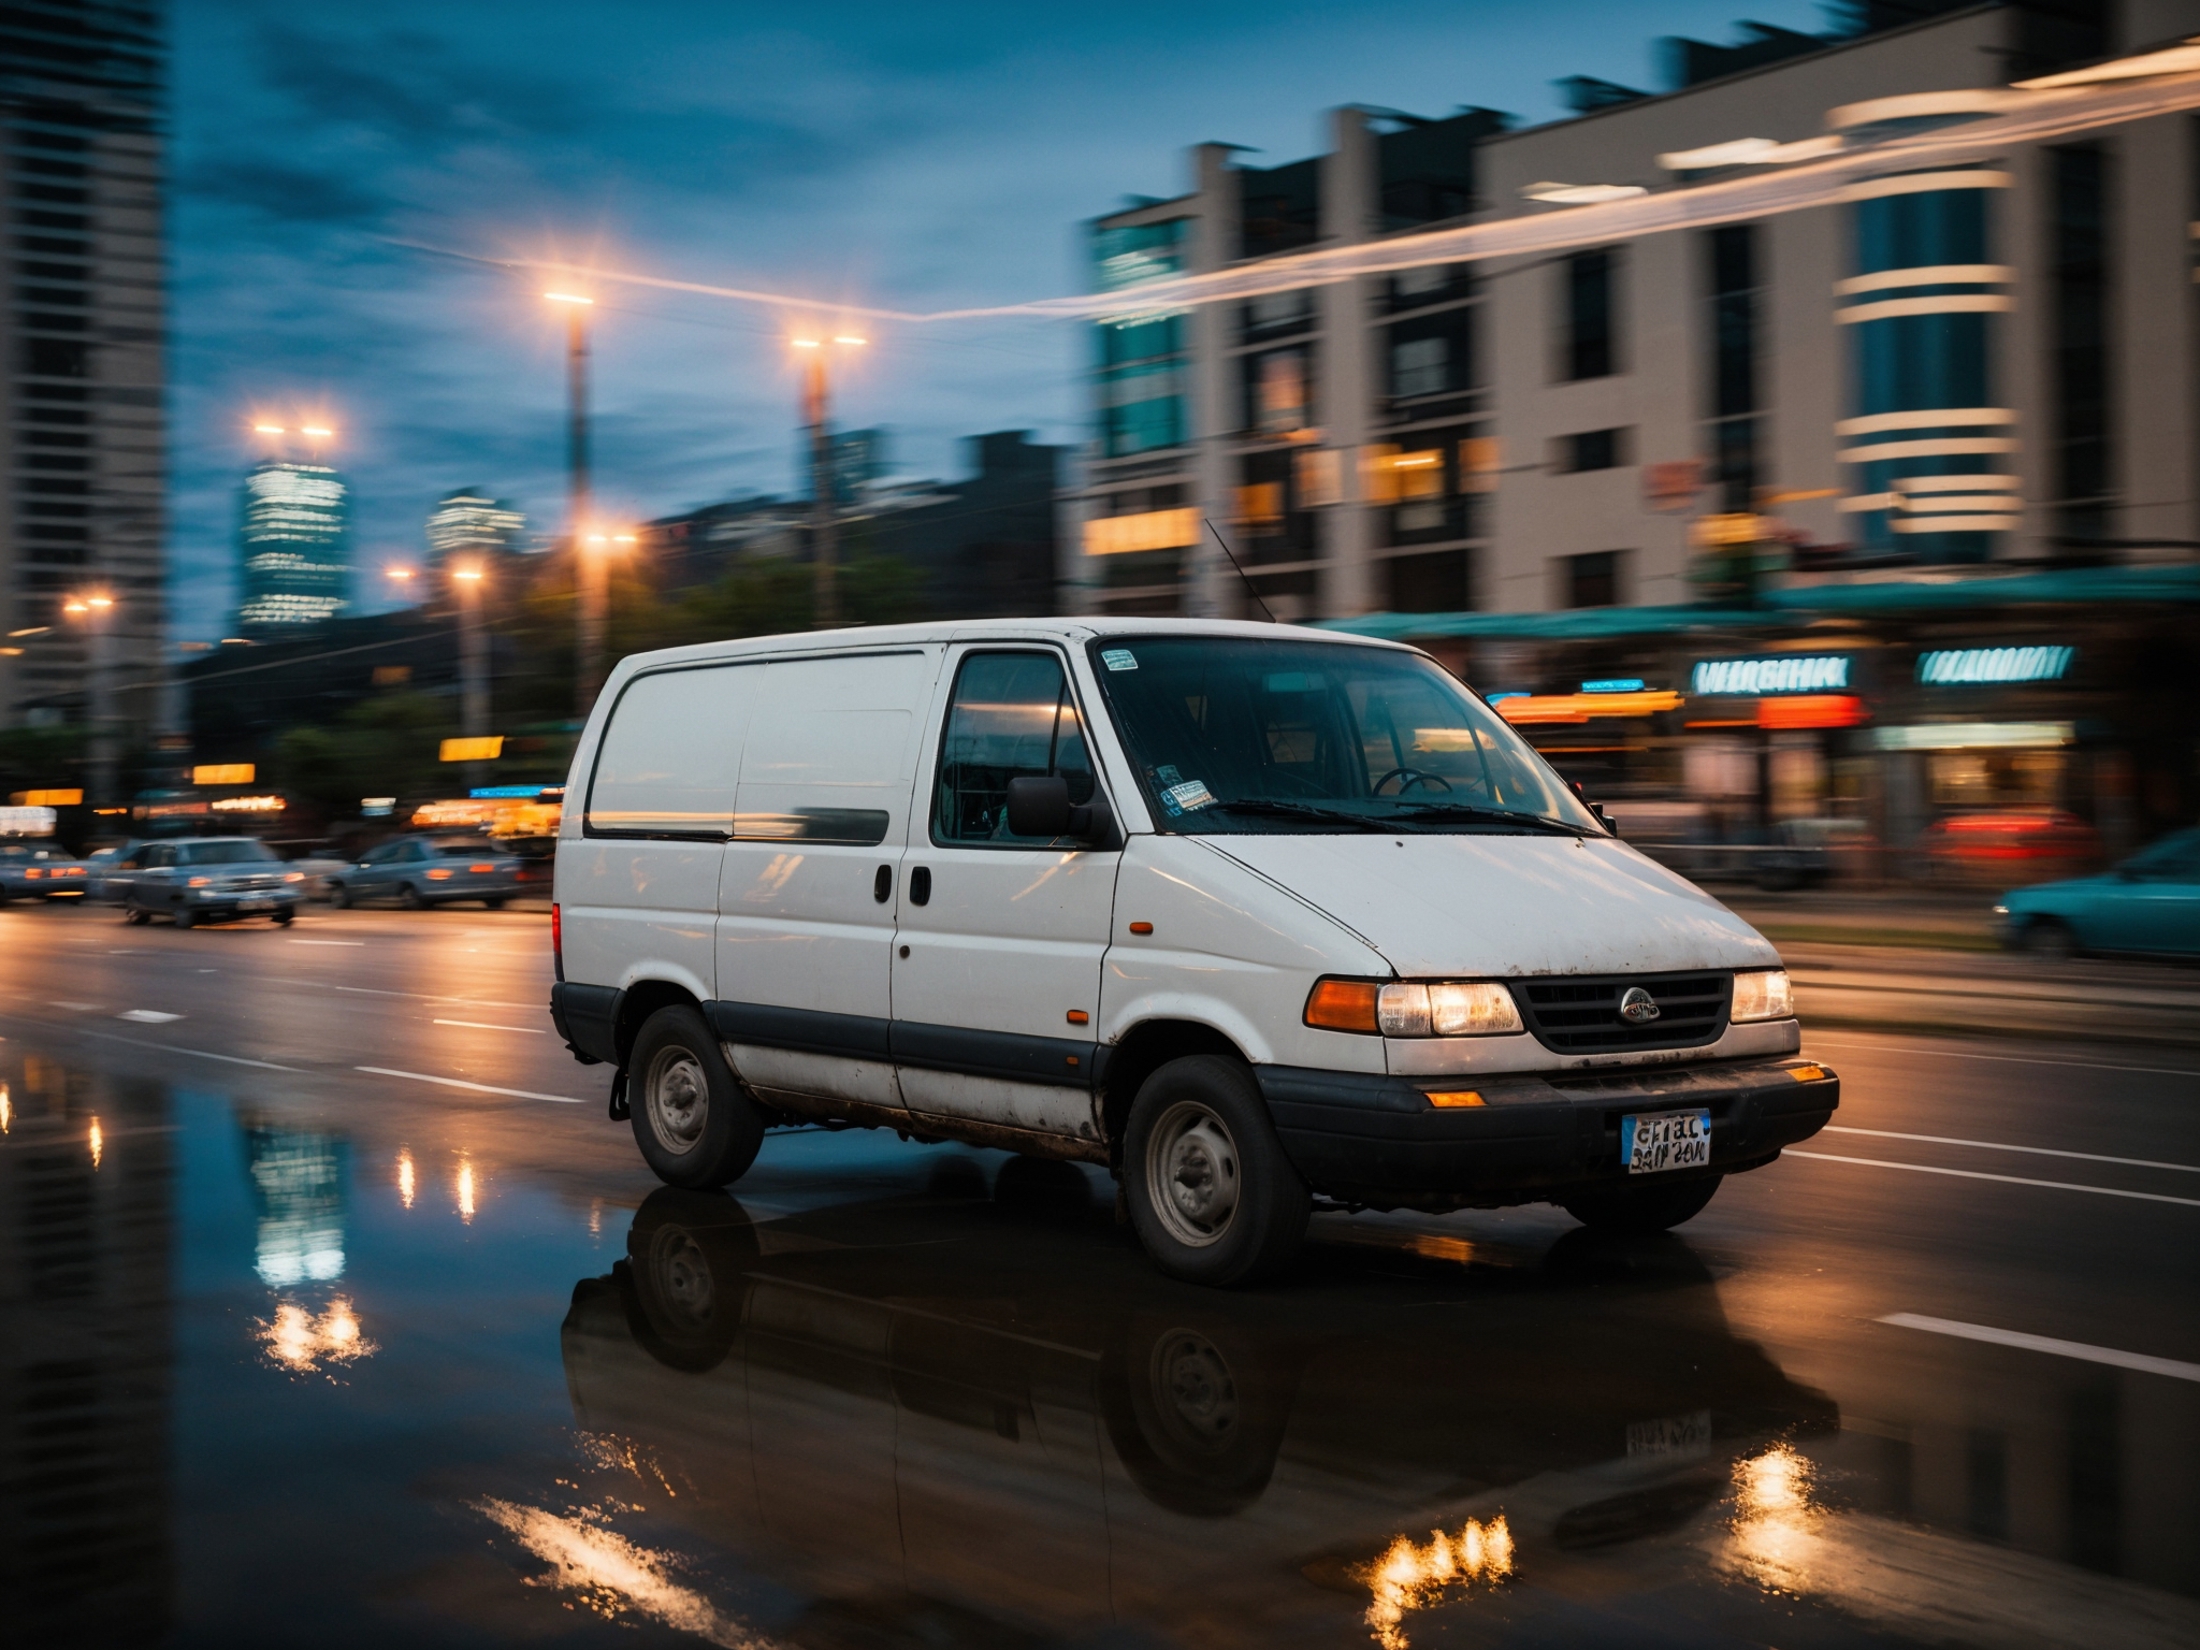 A white van driving on a city street at night.